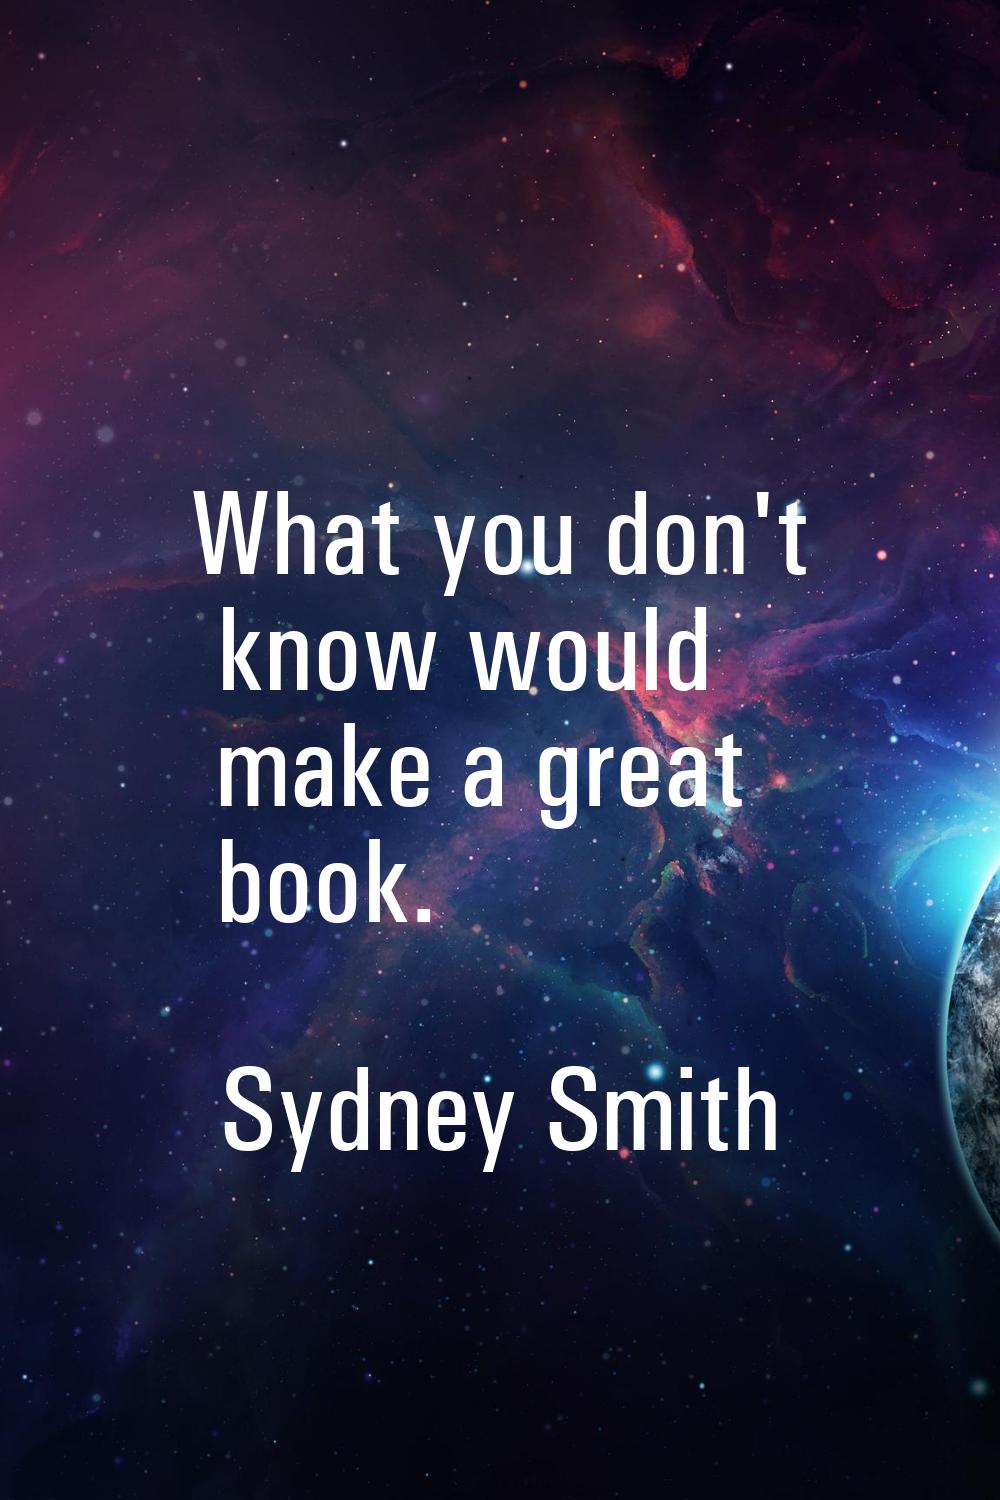 What you don't know would make a great book.